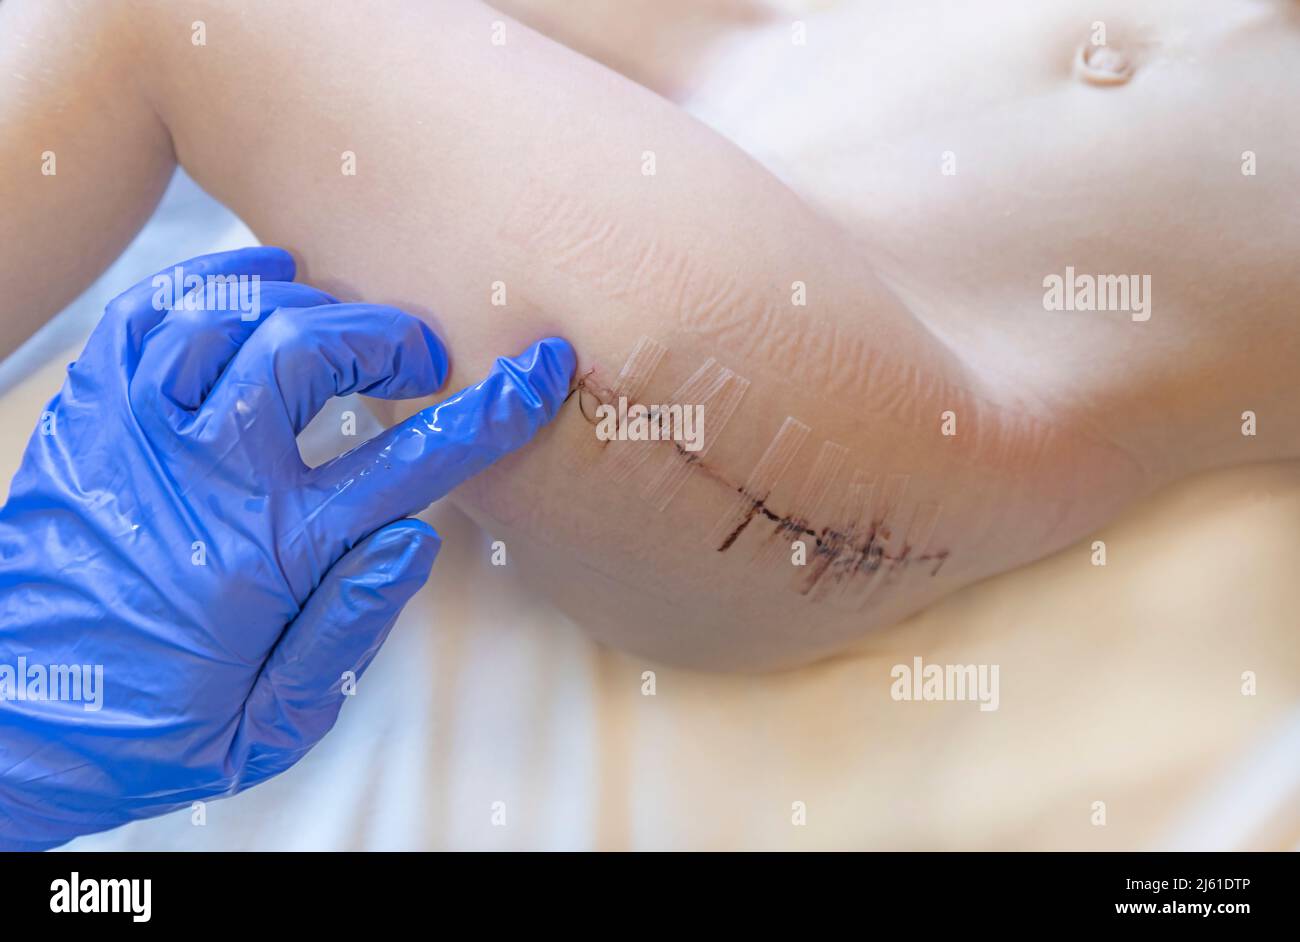 close-up of human skin with strips for sutures and wound closure or surgical tape after surgery on a child's leg. Stock Photo